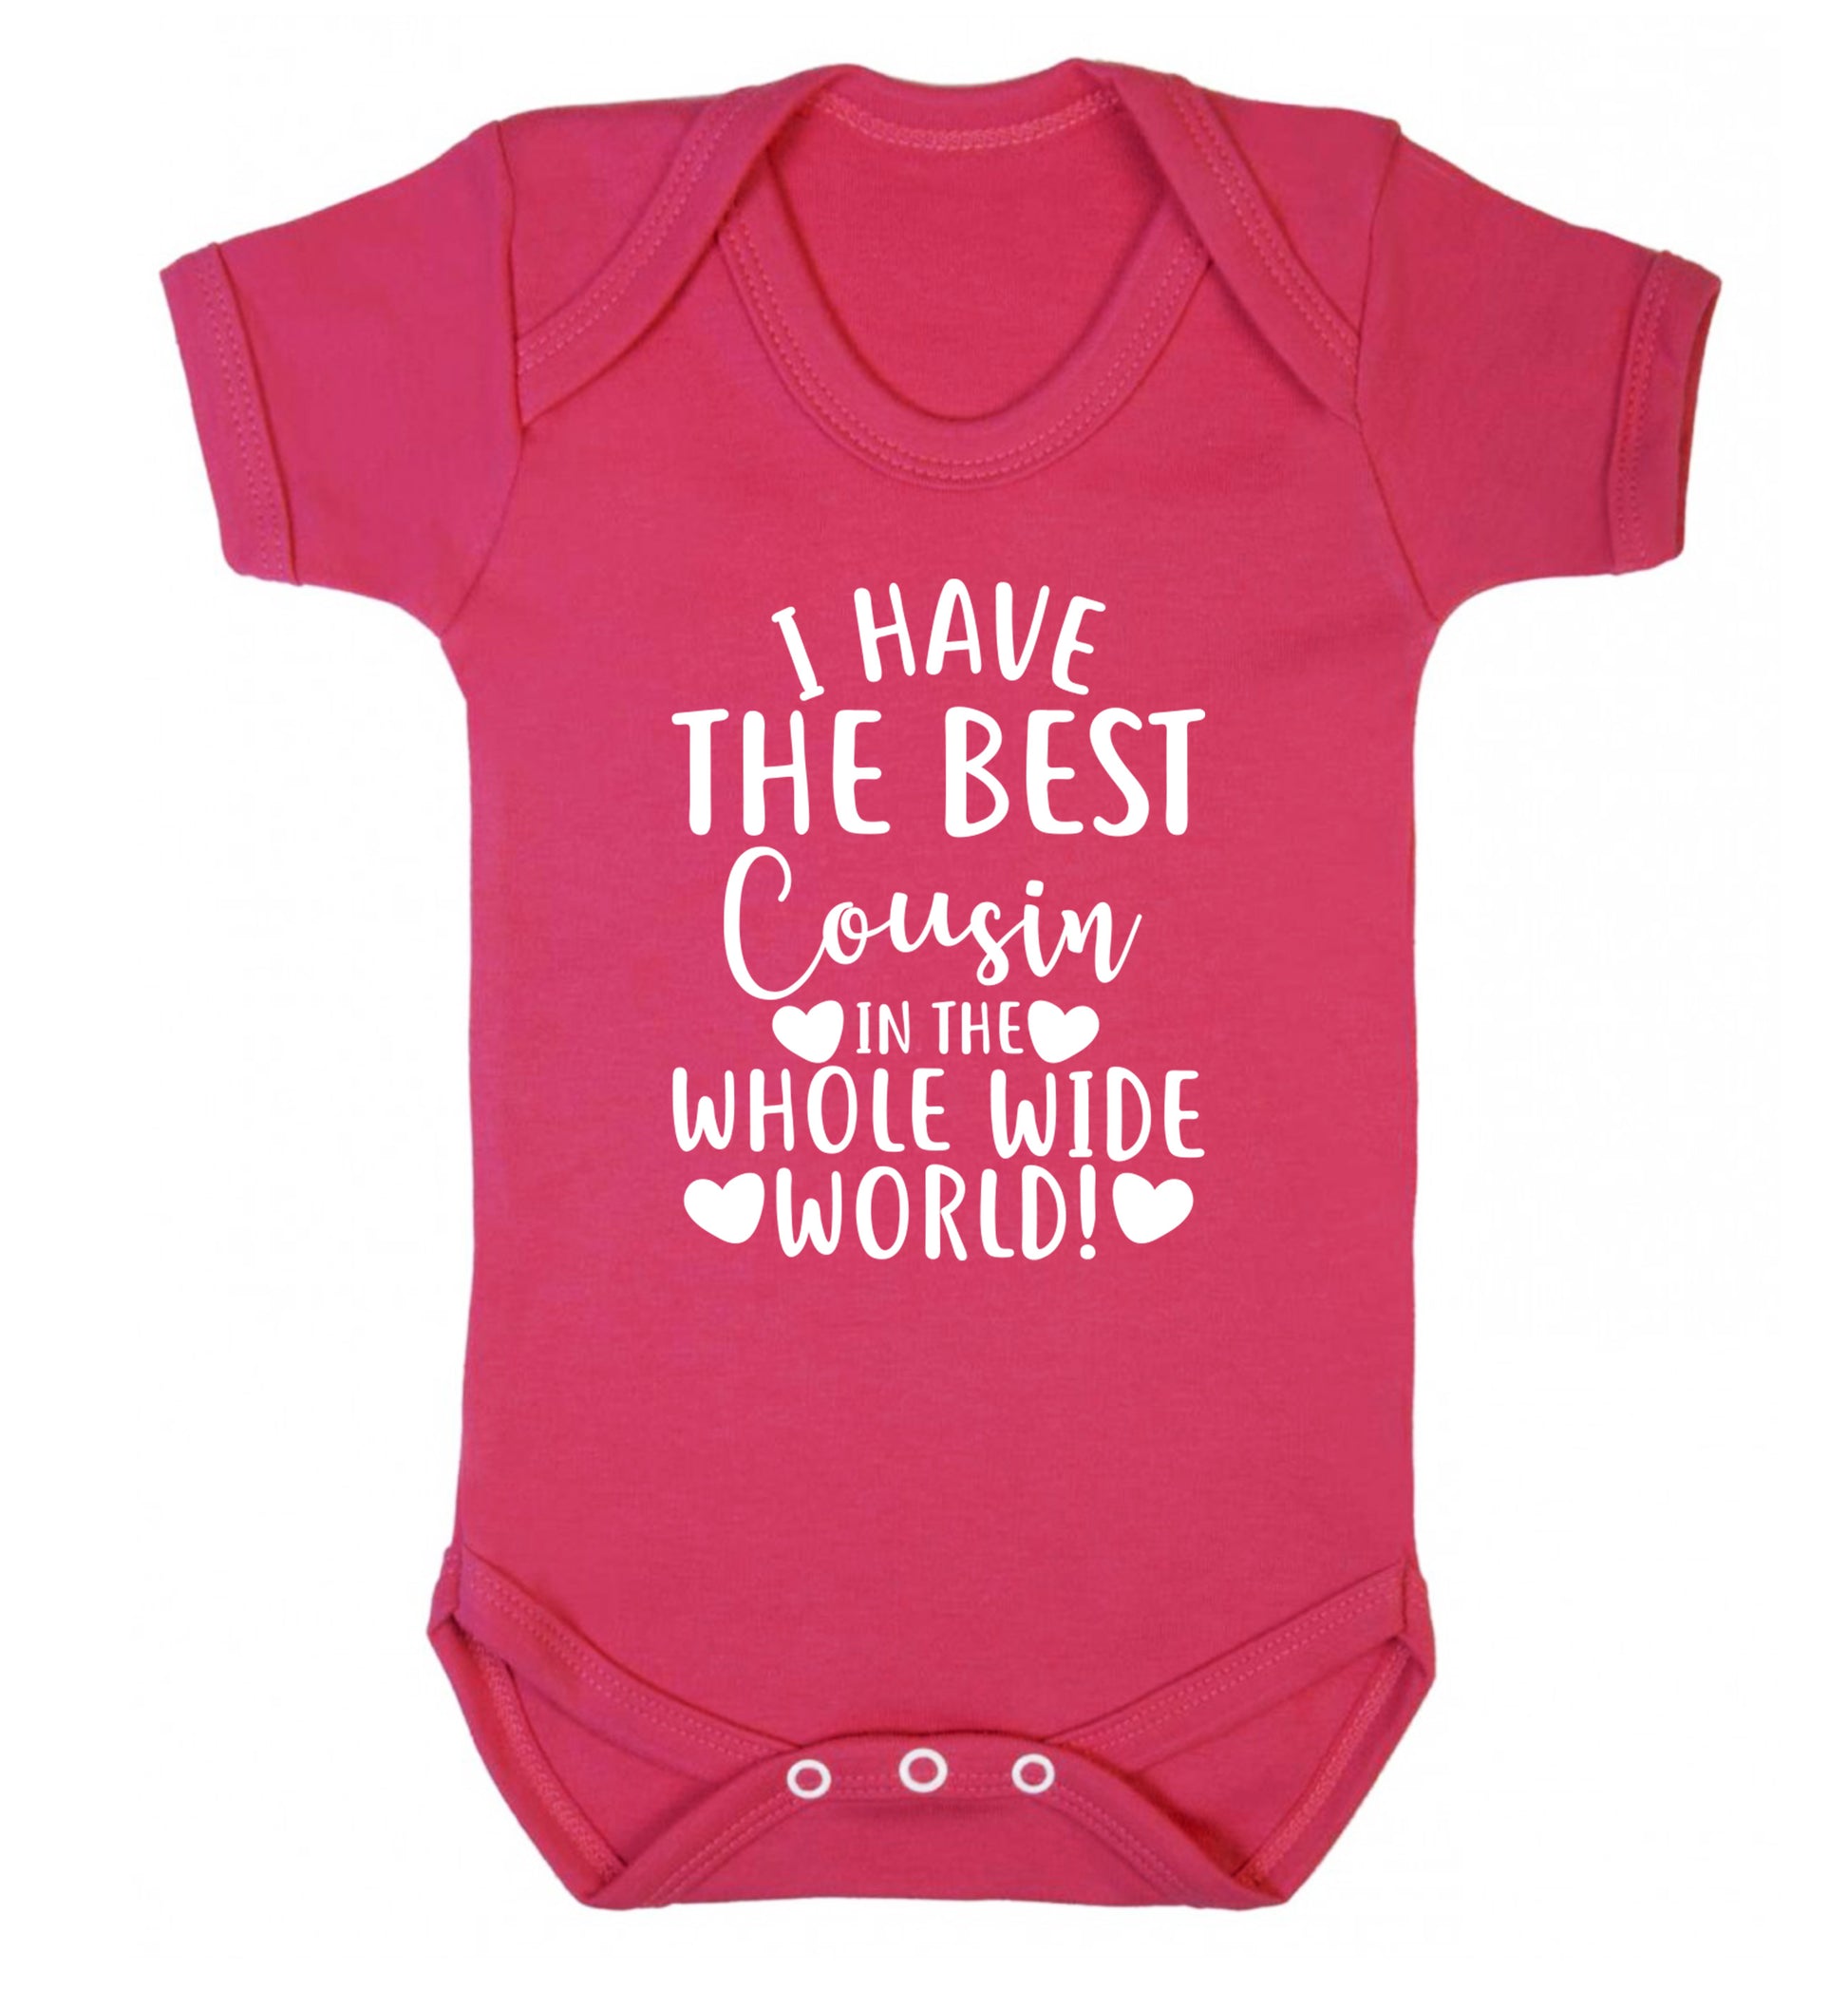 I have the best cousin in the whole wide world! Baby Vest dark pink 18-24 months